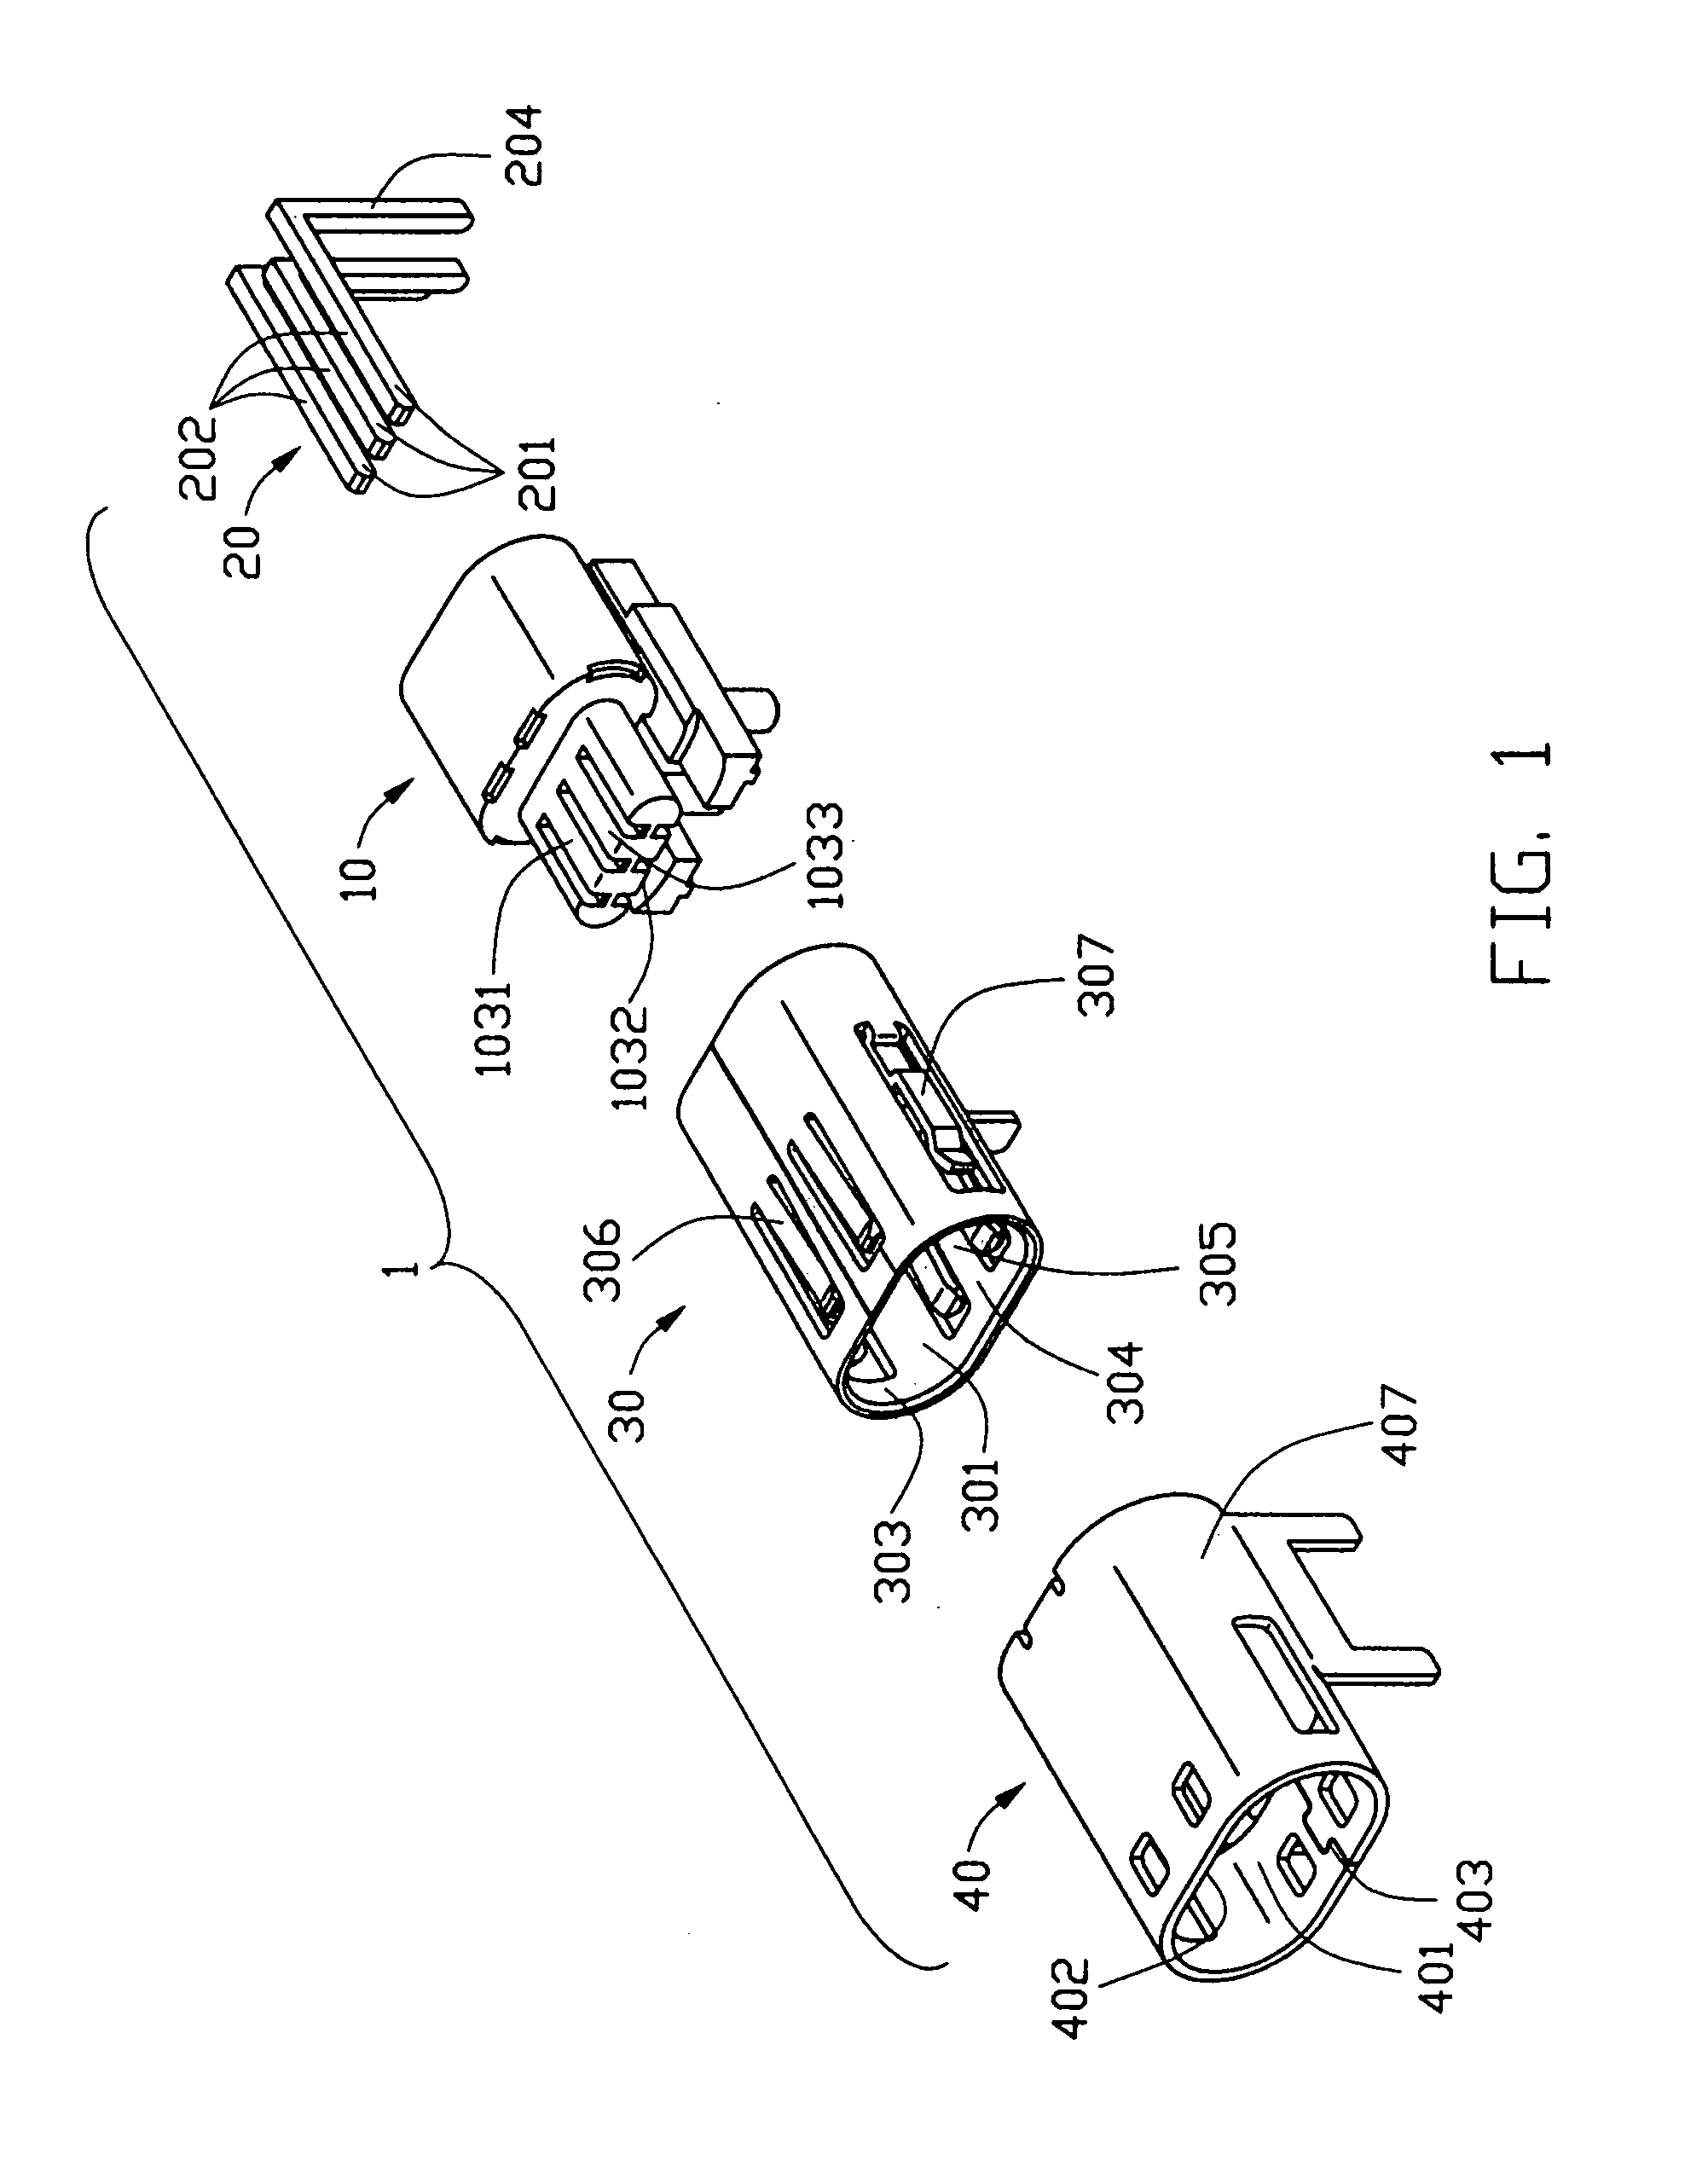 Power connector with improved contact structure